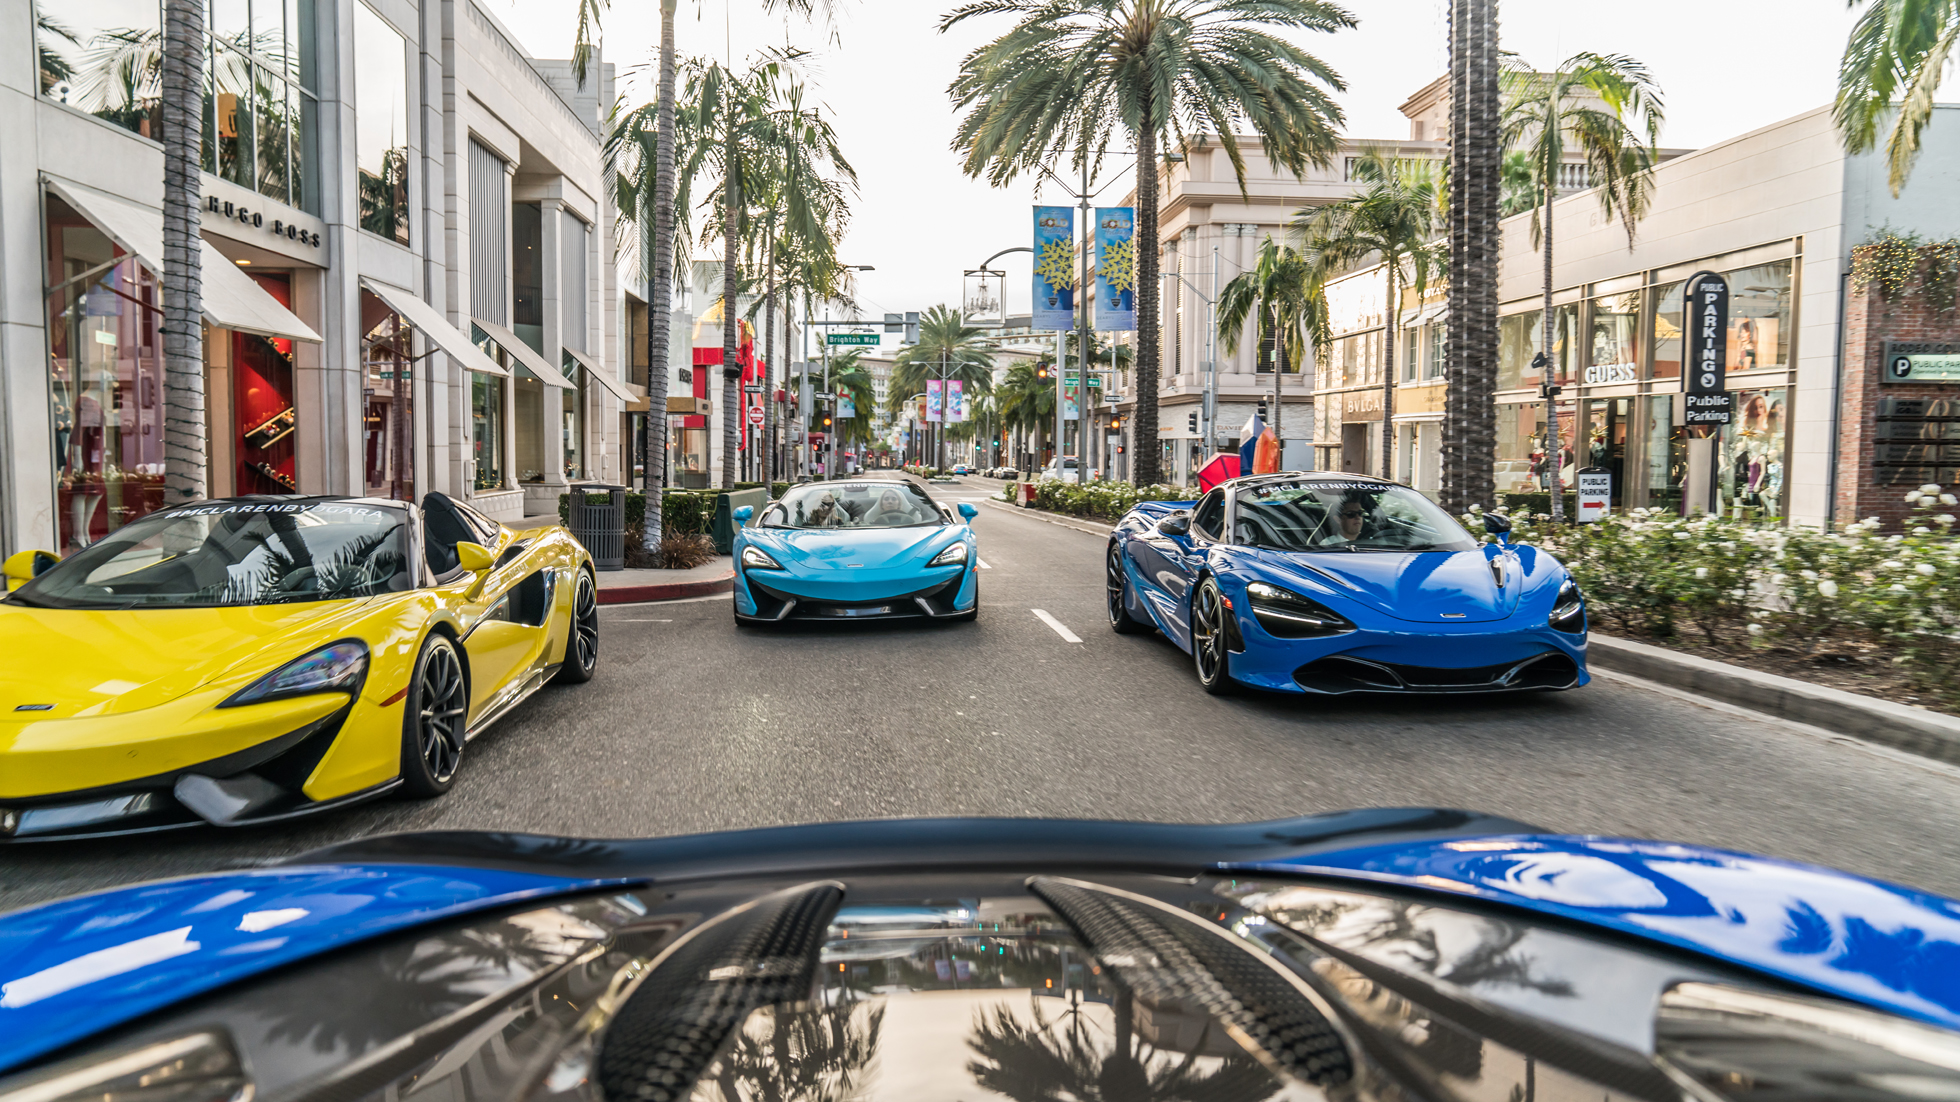 Experience shopping and luxury cars when you visit Rodeo Drive